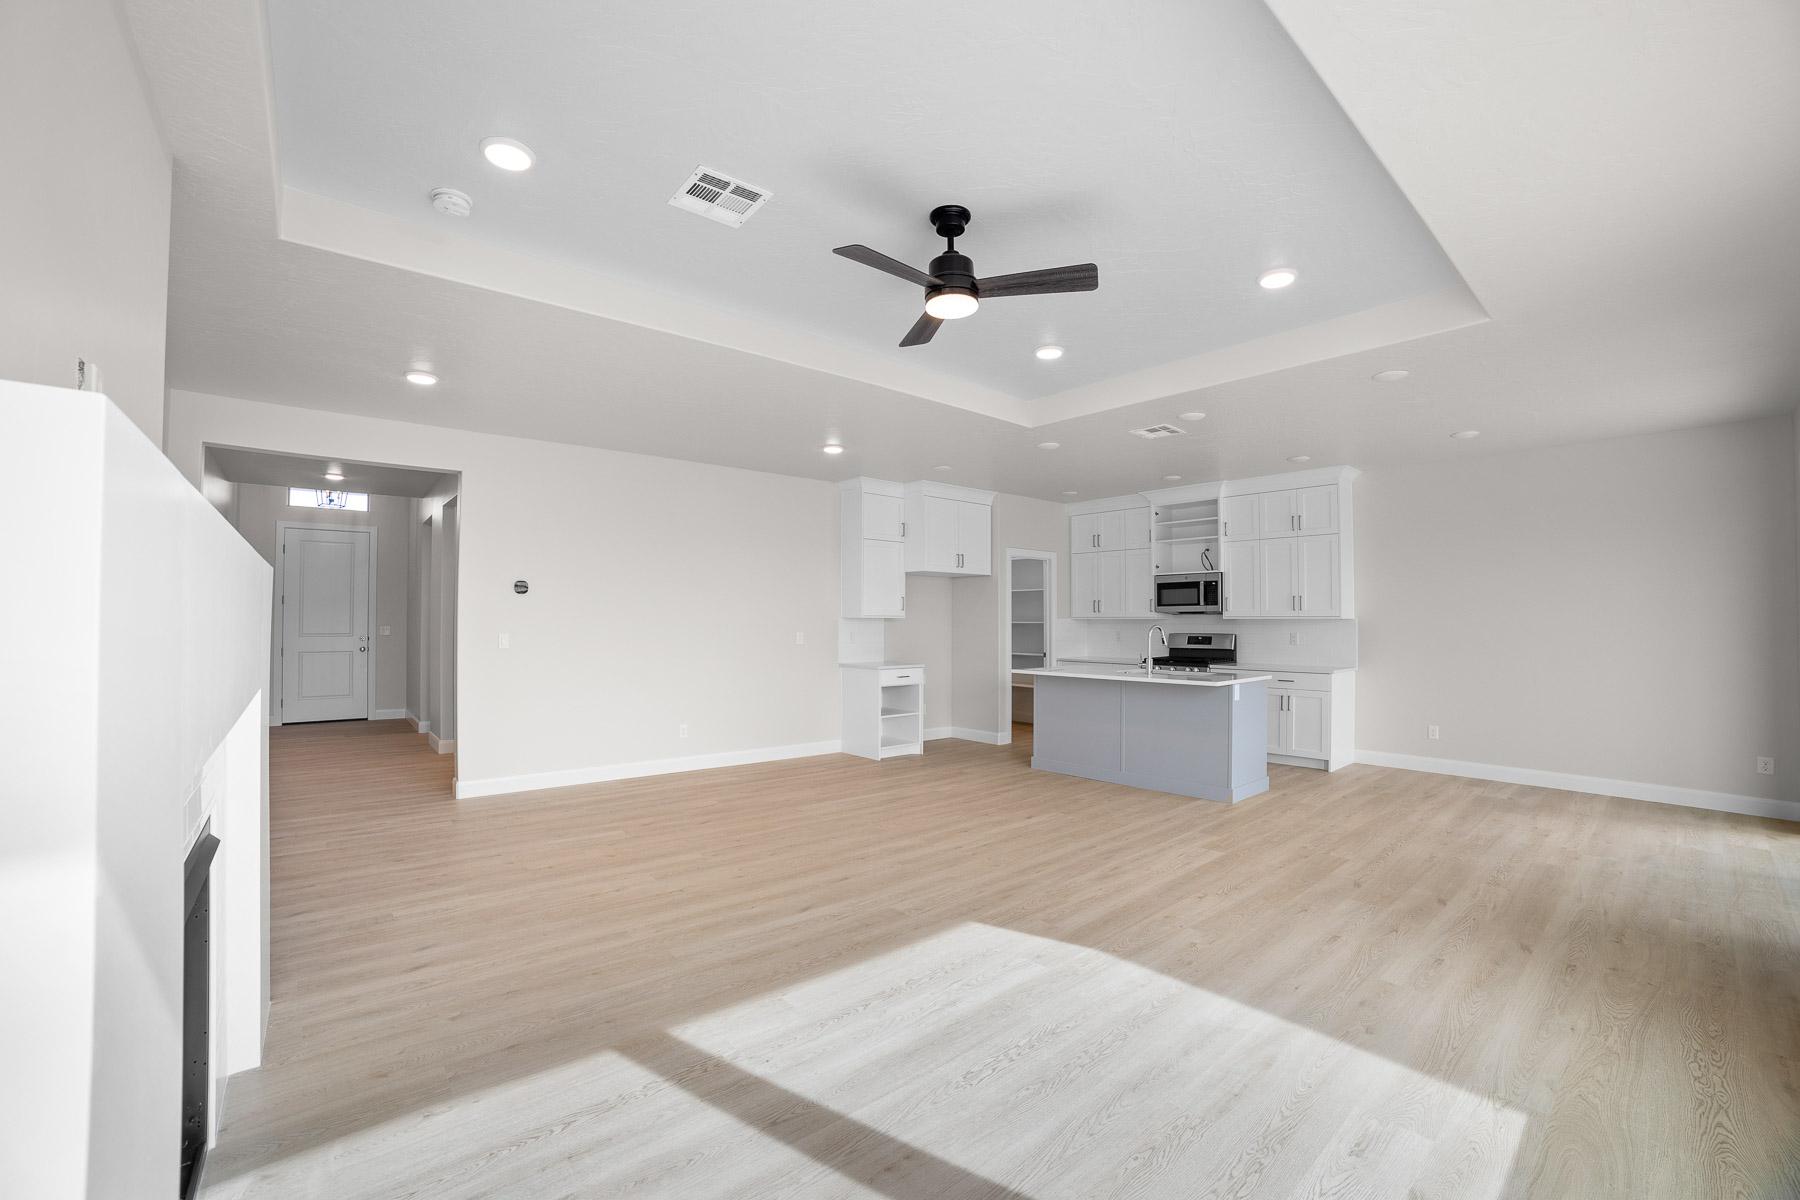 Adenium Family Room and Kitchen. 3br New Home in St. George, UT